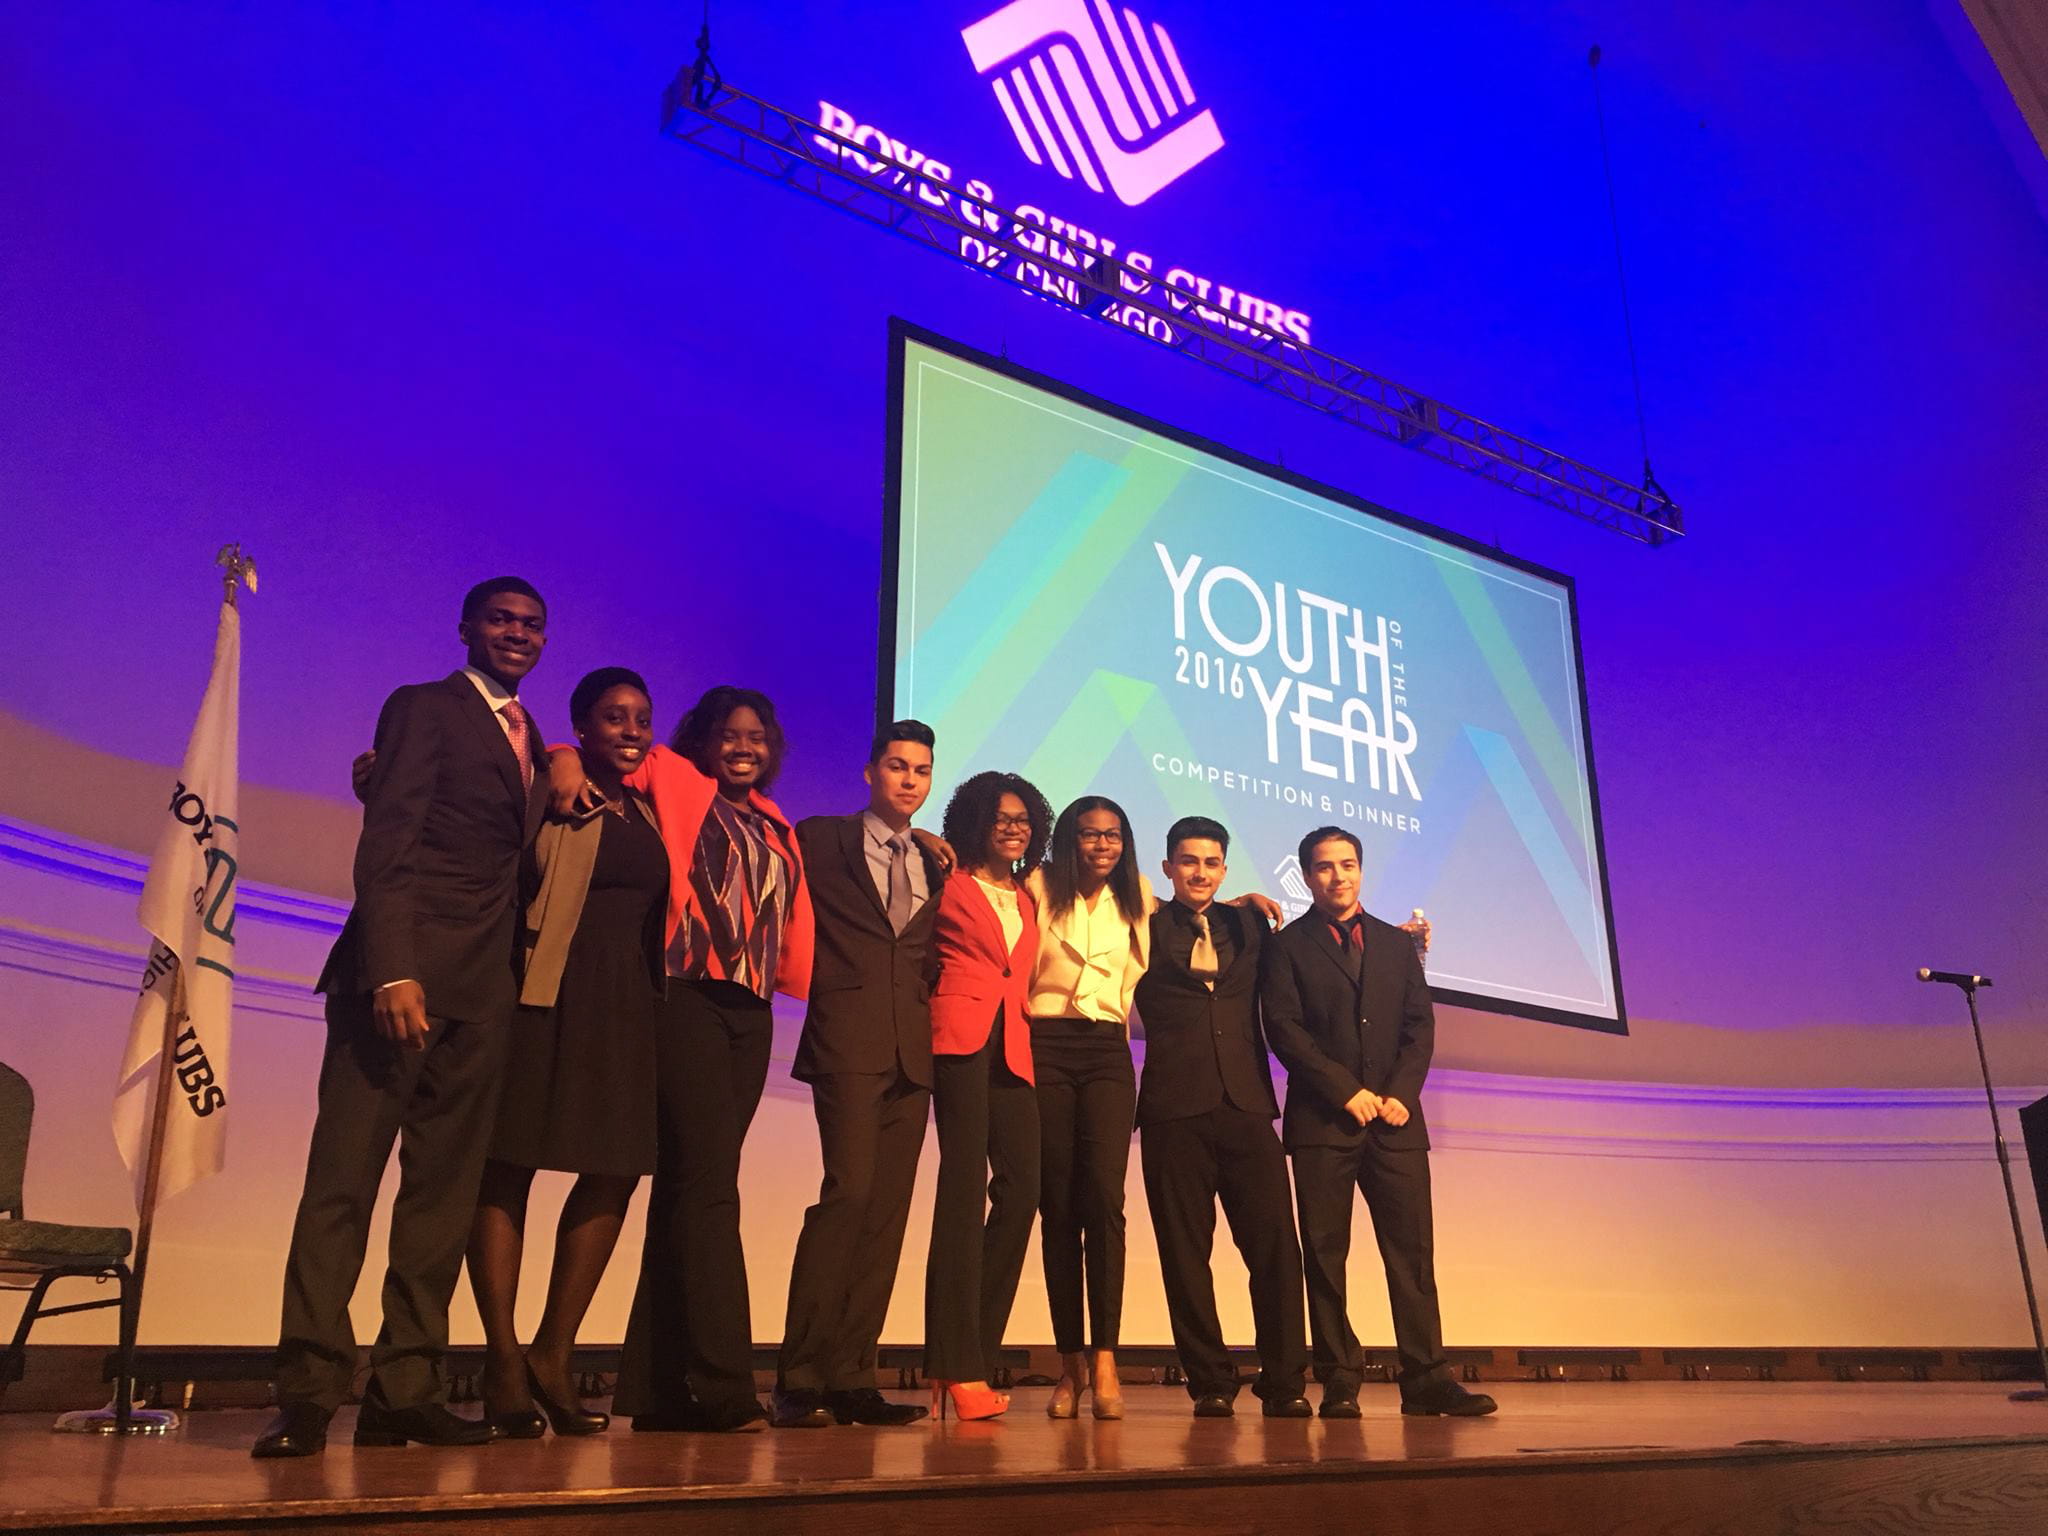 Student Named Runner Up in Boys & Girls Clubs of Chicago’s 2016 Youth of the Year Competition-student-named-runner-up-in-boys-and-girls-clubs-of-chicagos-2016-youth-of-the-year-competition-12819182_10153697330334079_8717168226642749250_o